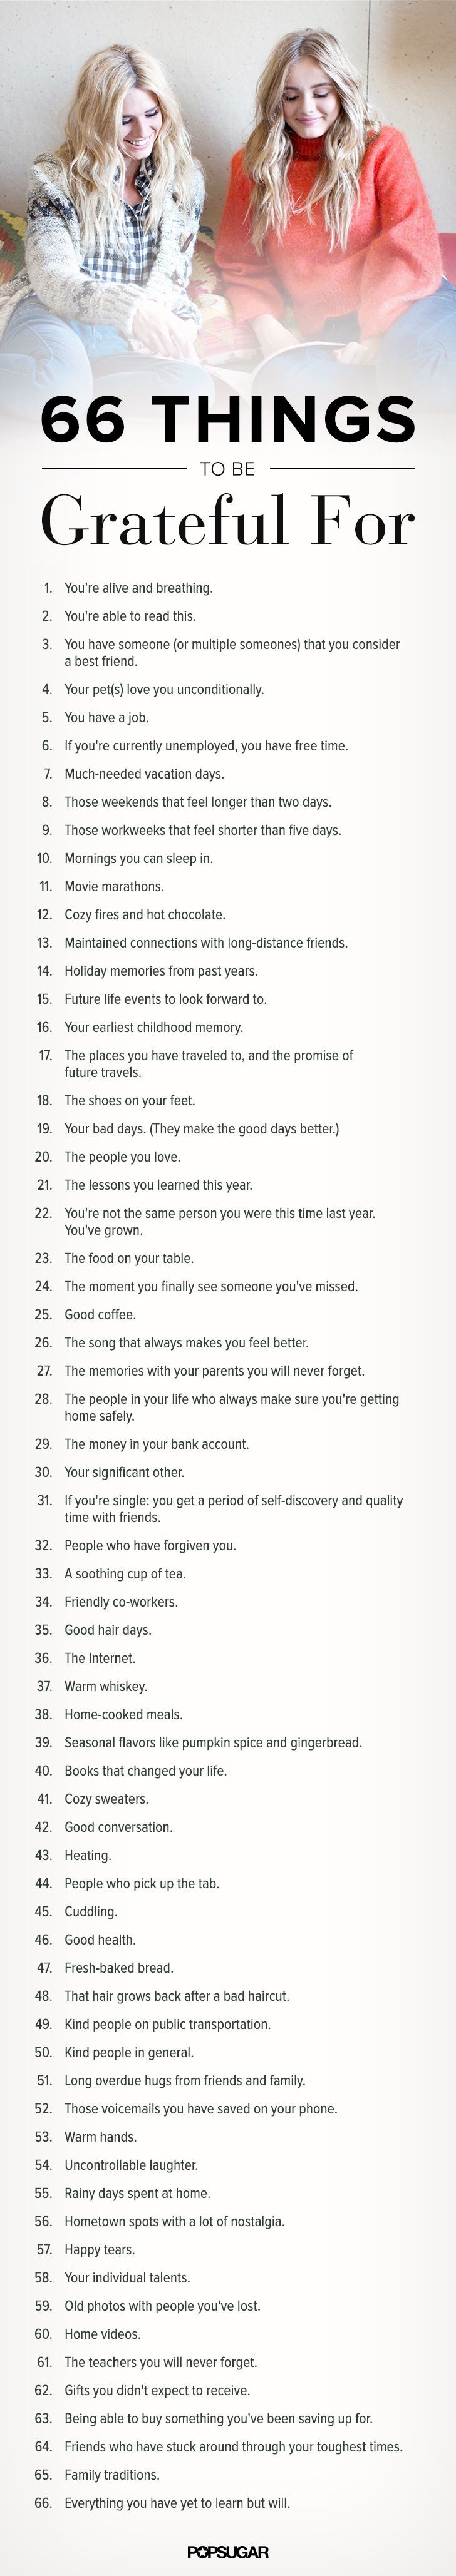 66 things to feel grateful for in your everyday li...